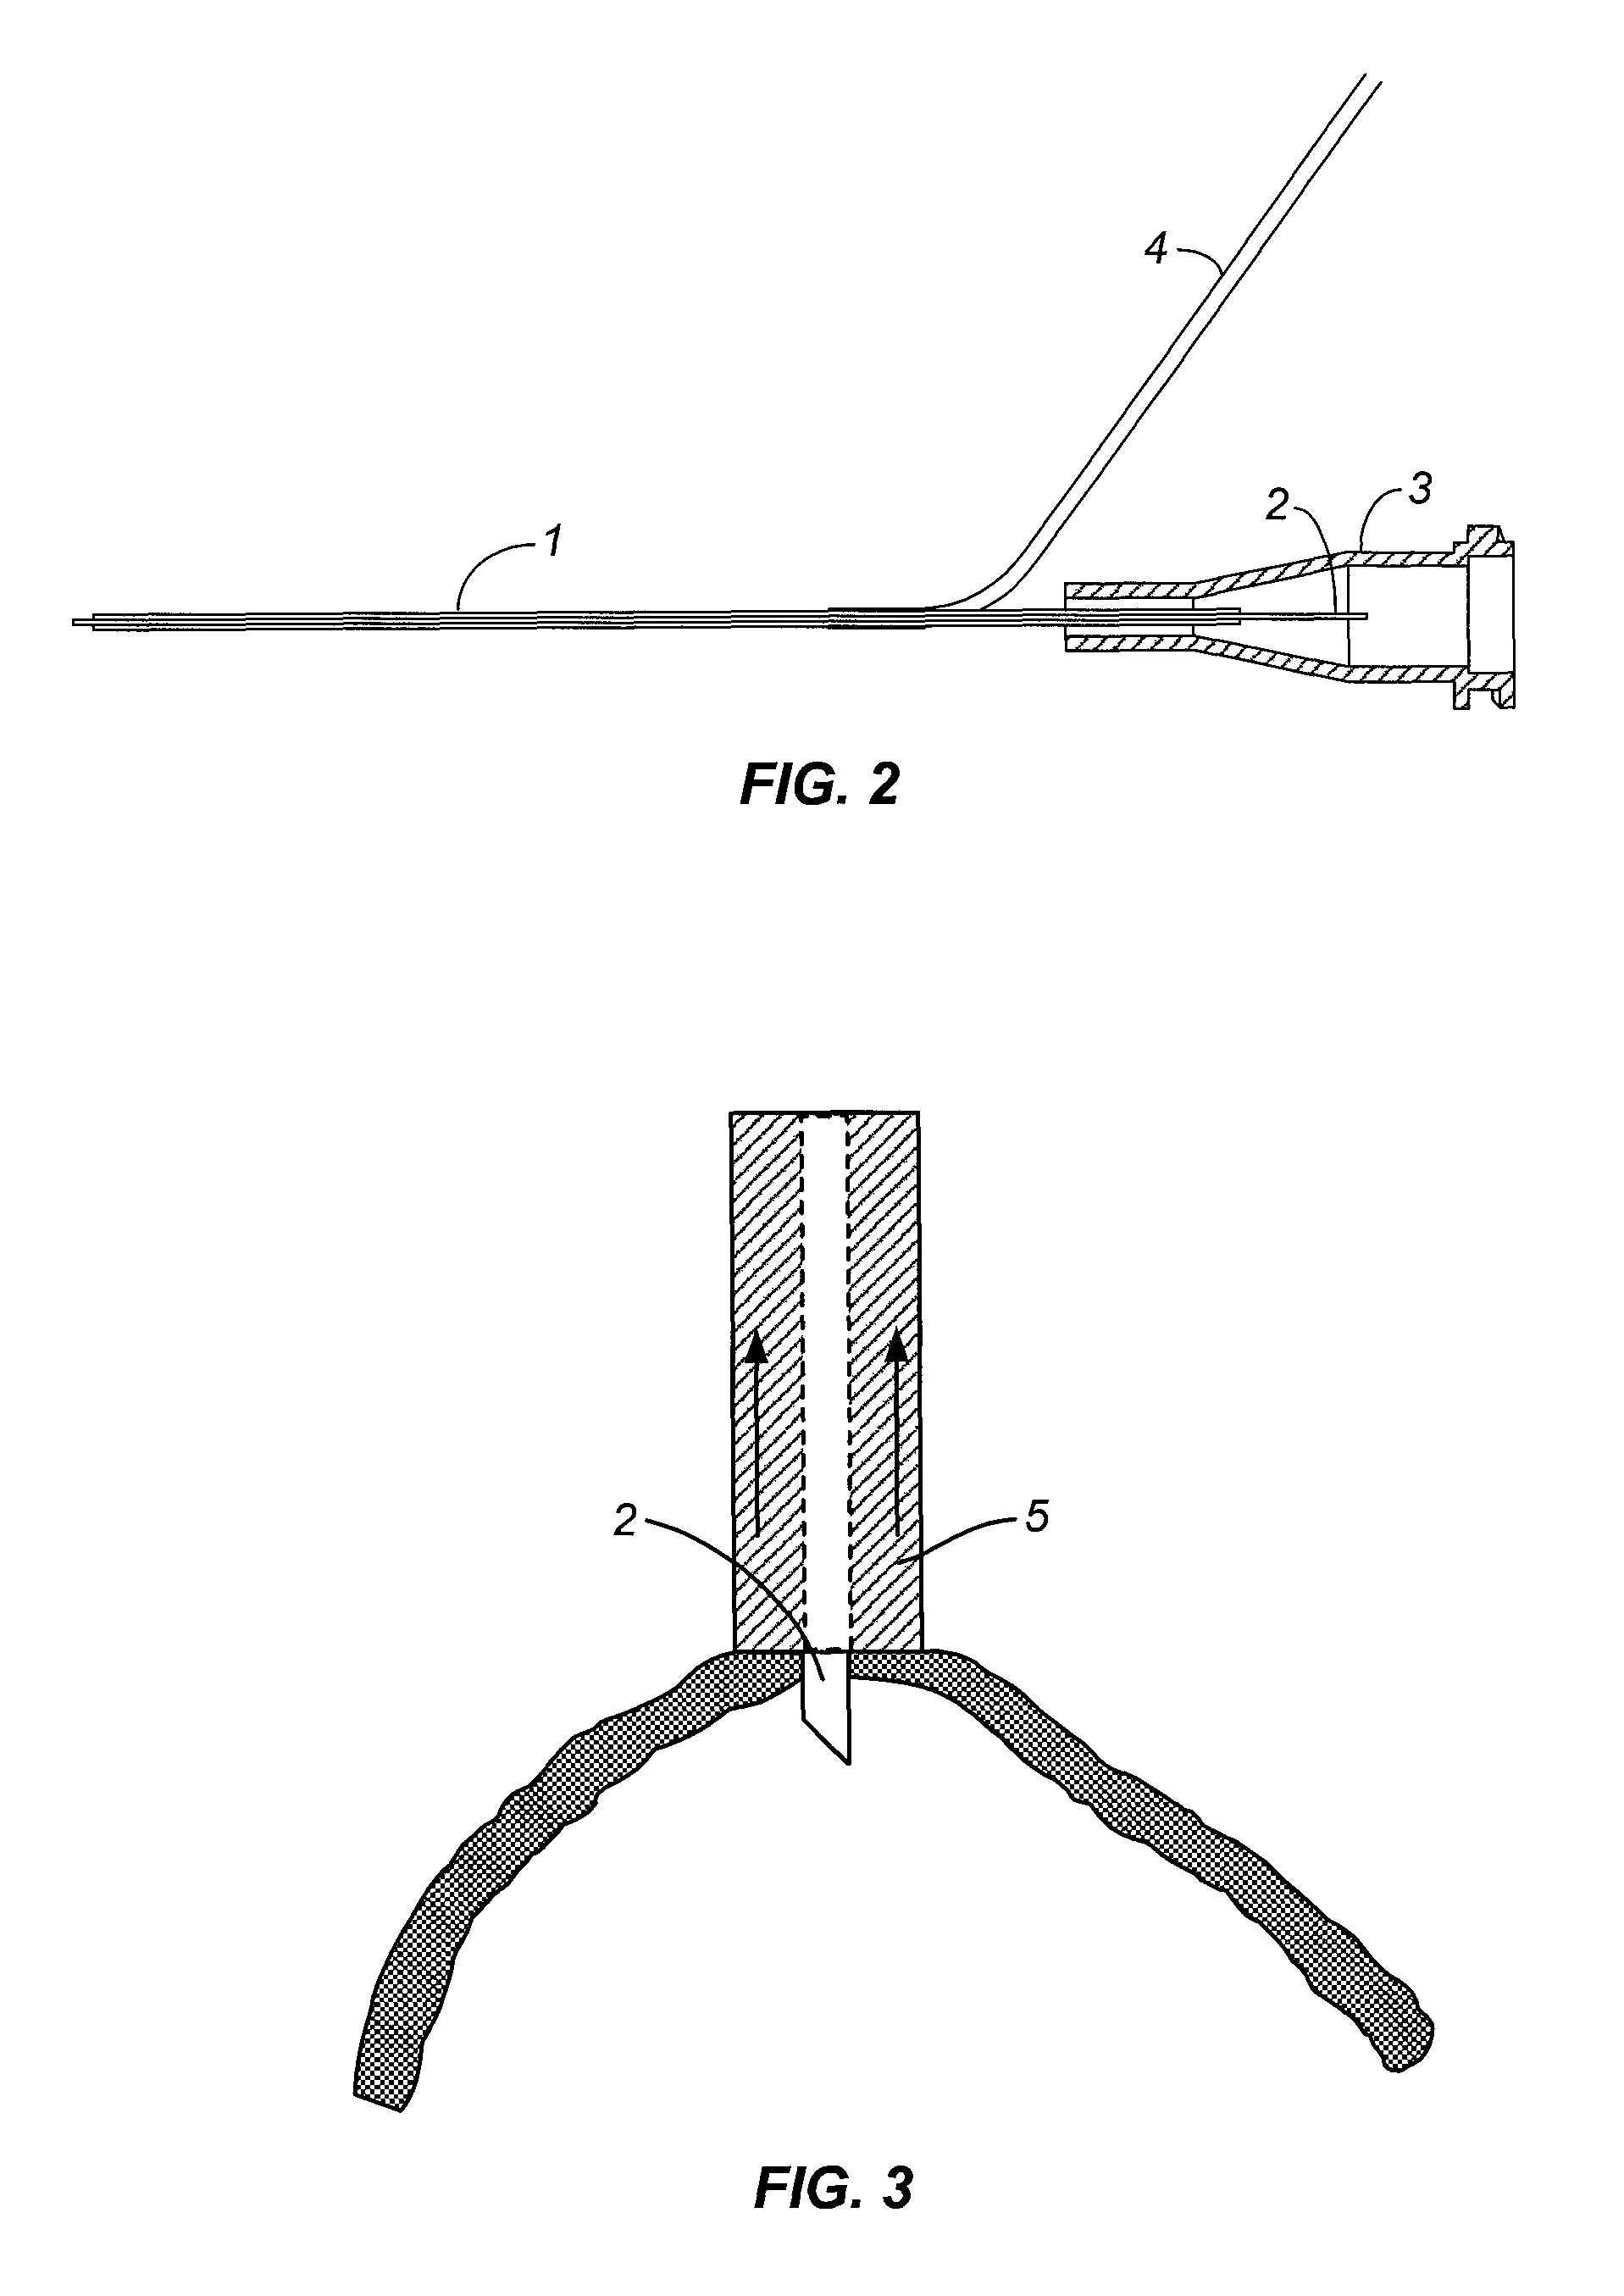 Subretinal access device